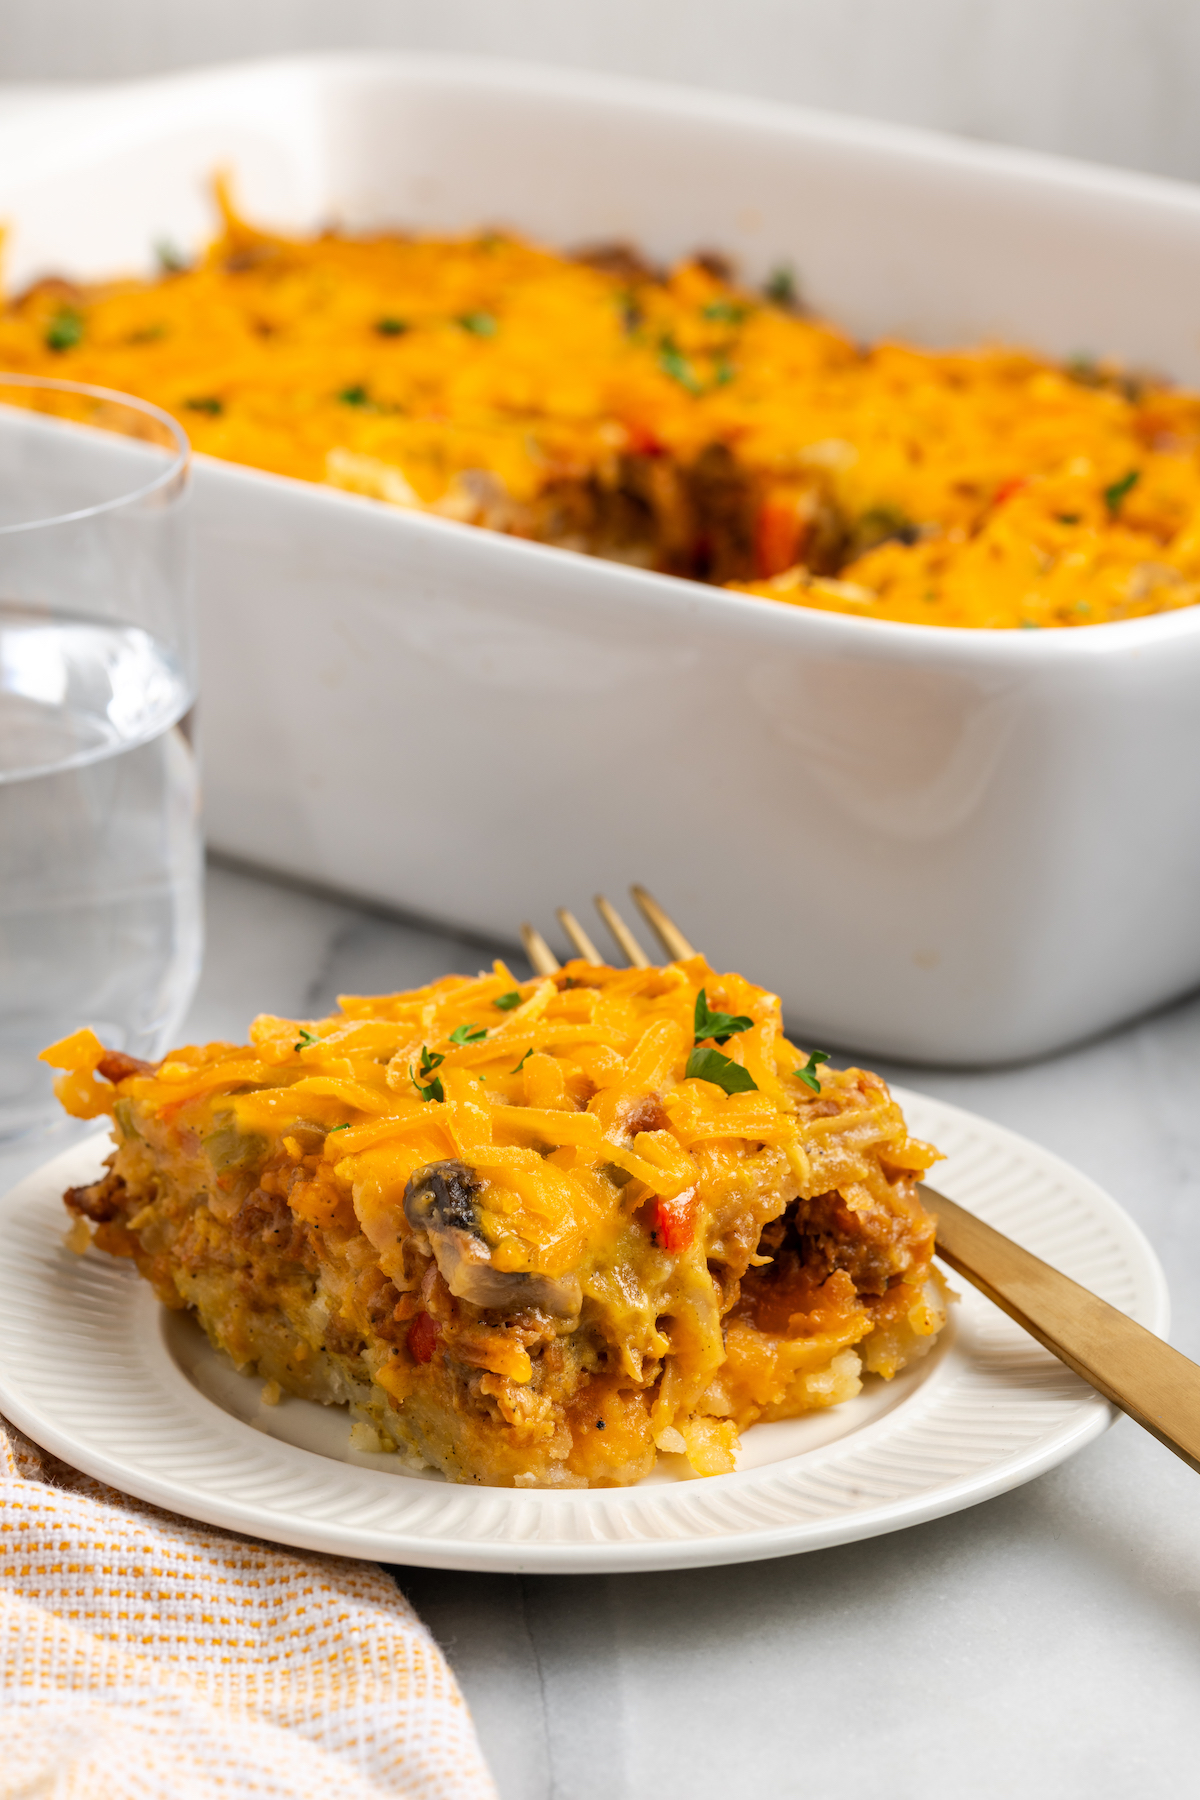 Vegan hashbrown breakfast casserole on plate with fork, with casserole dish in background